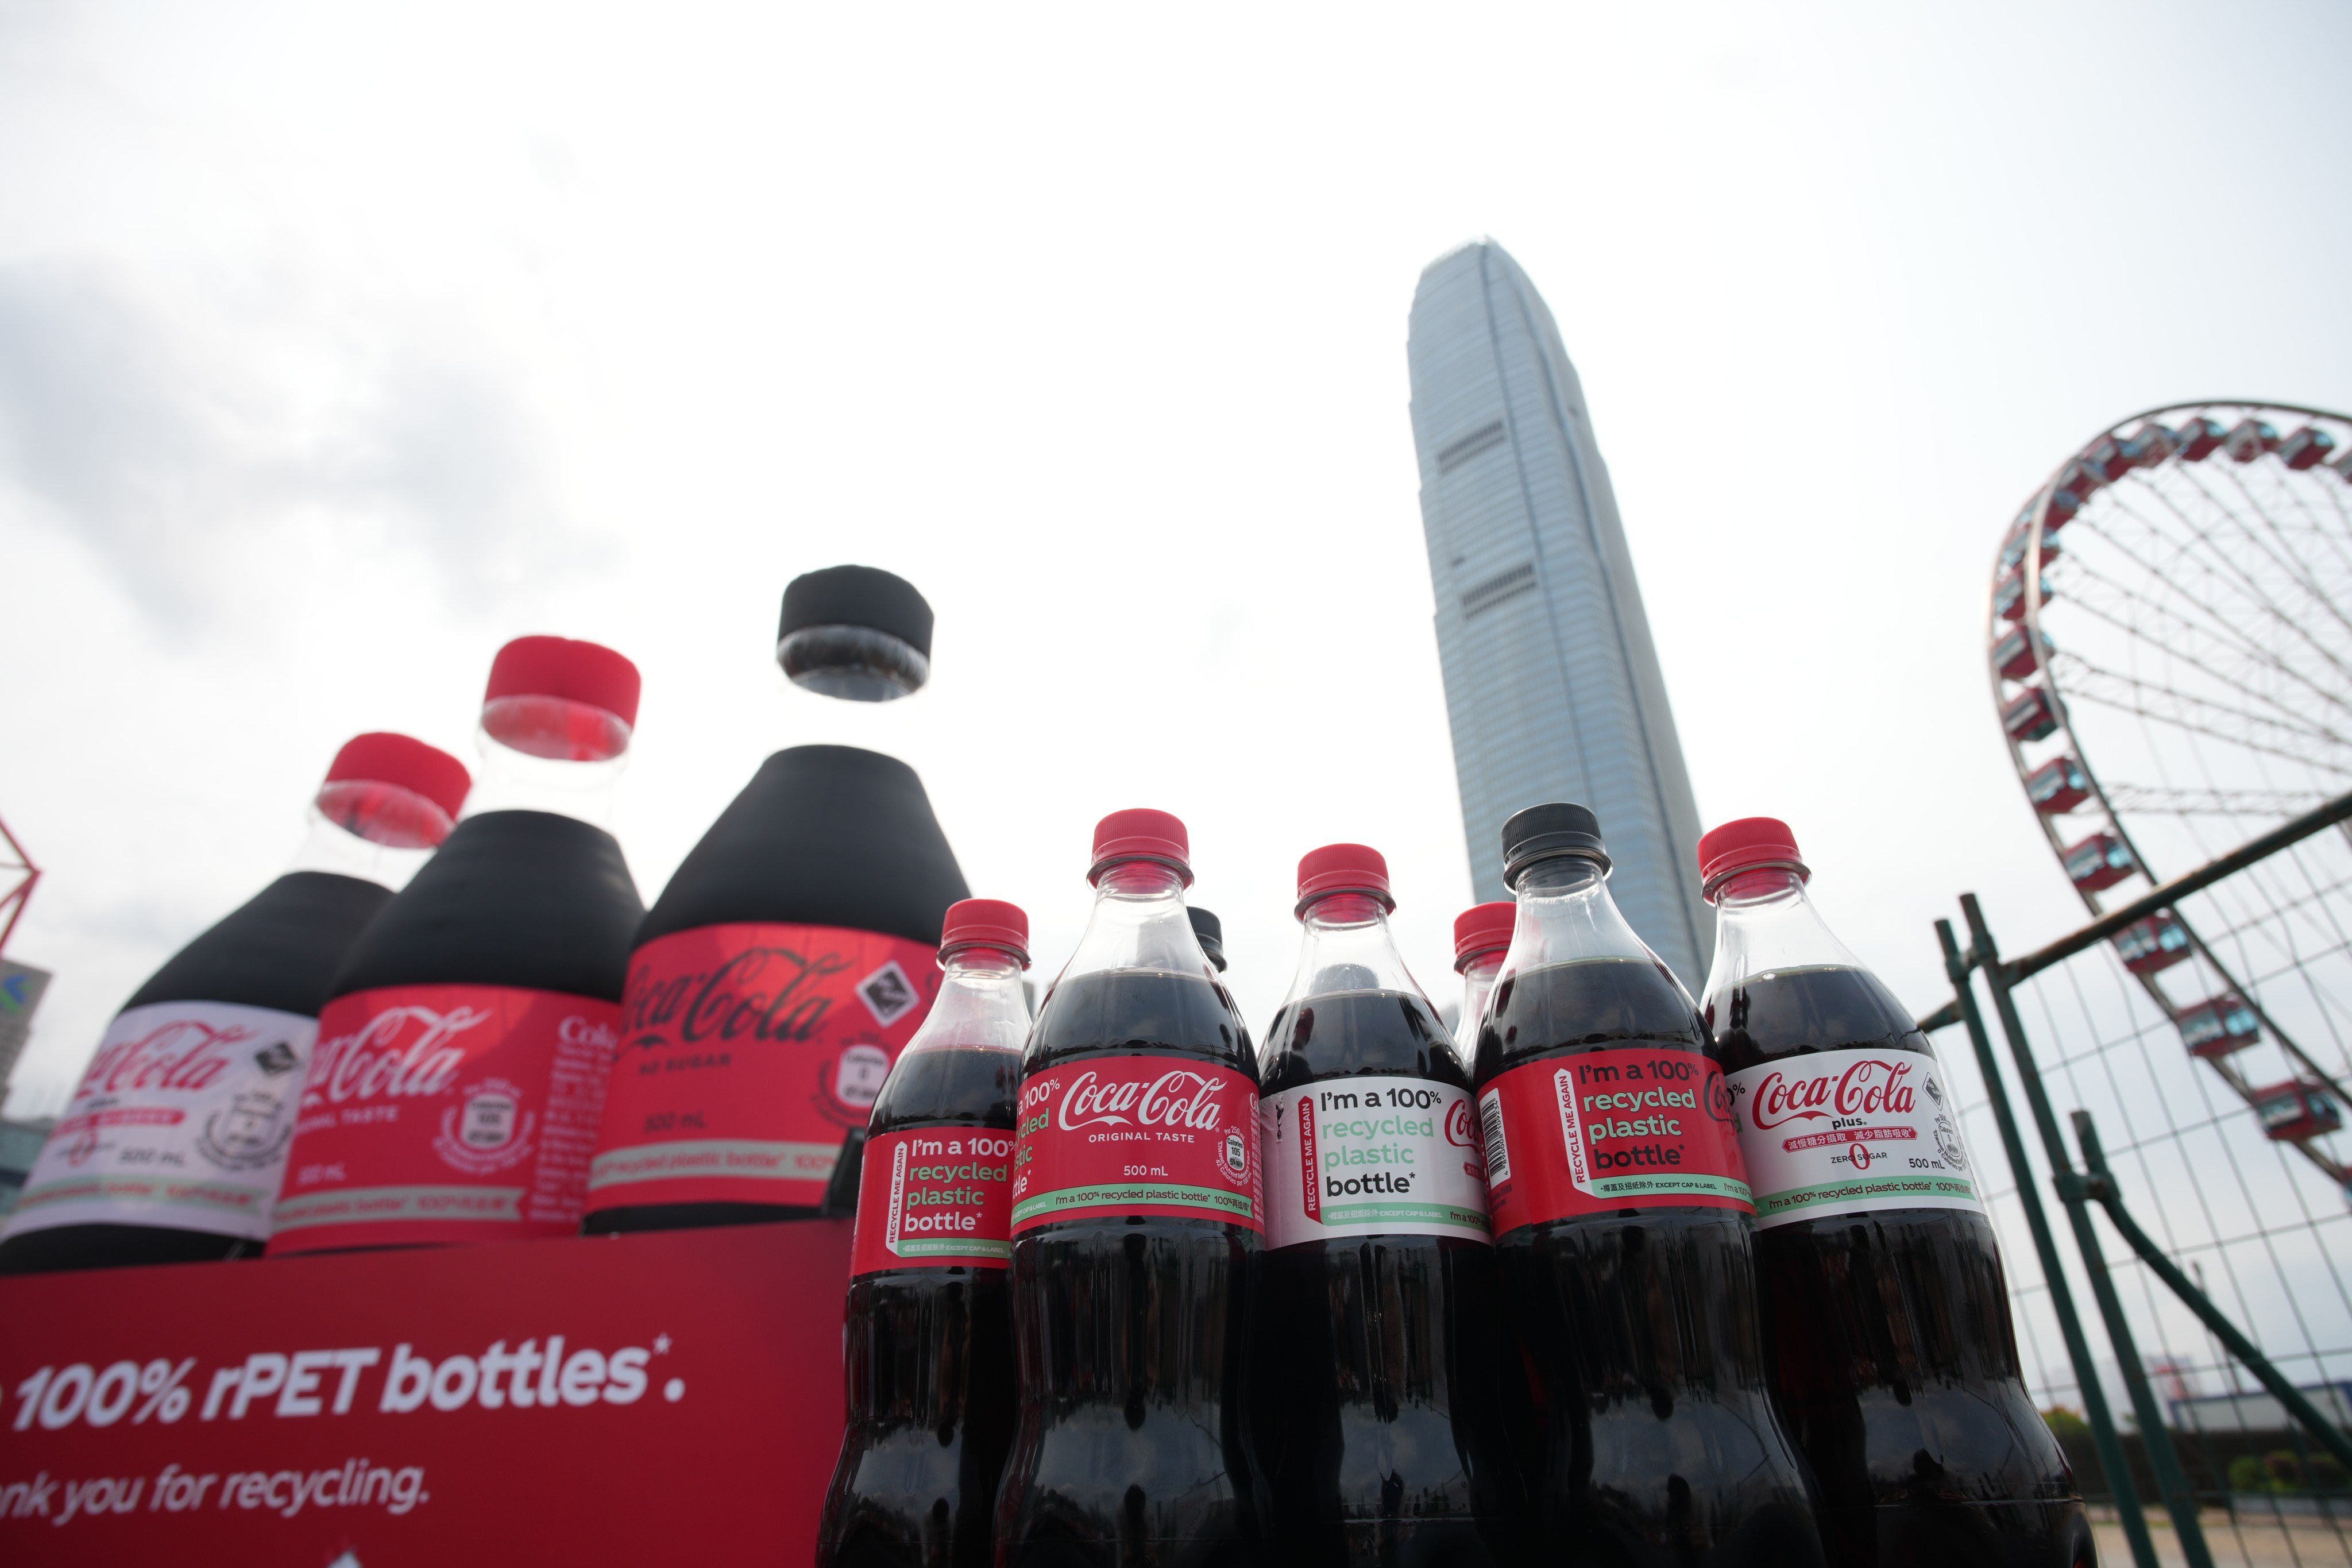 The global drinks giant said all 500ml bottles for Coca-Cola Original, Coca-Cola No Sugar and Coca-Cola Plus in Hong Kong have shifted to recycled polyethylene terephthalate (rPET). Photo: Eugene Lee